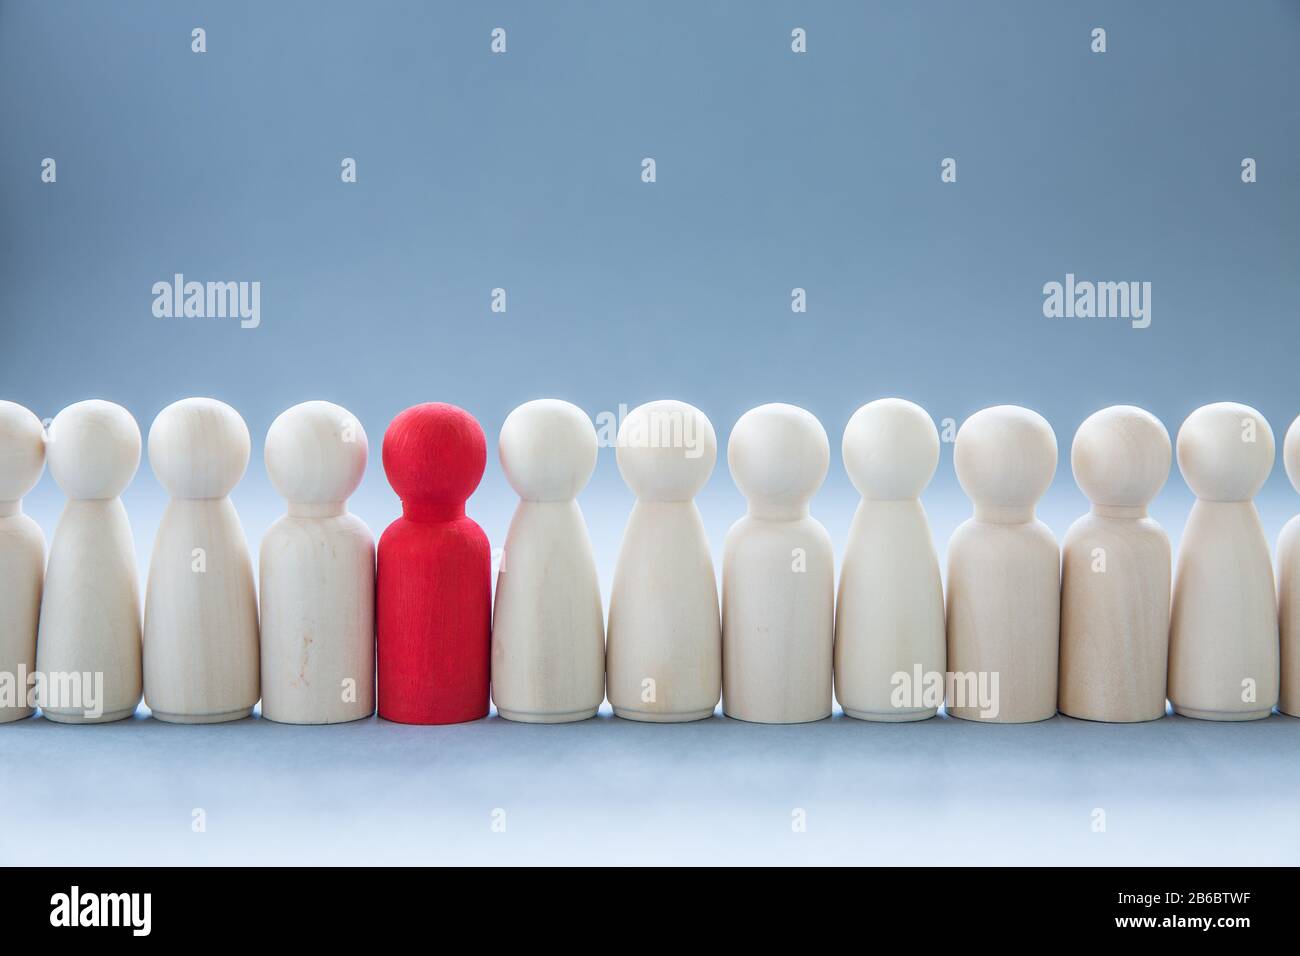 A row of human figures with a single individual standing out from the rest representing individuality and being different such as having a disease lik Stock Photo